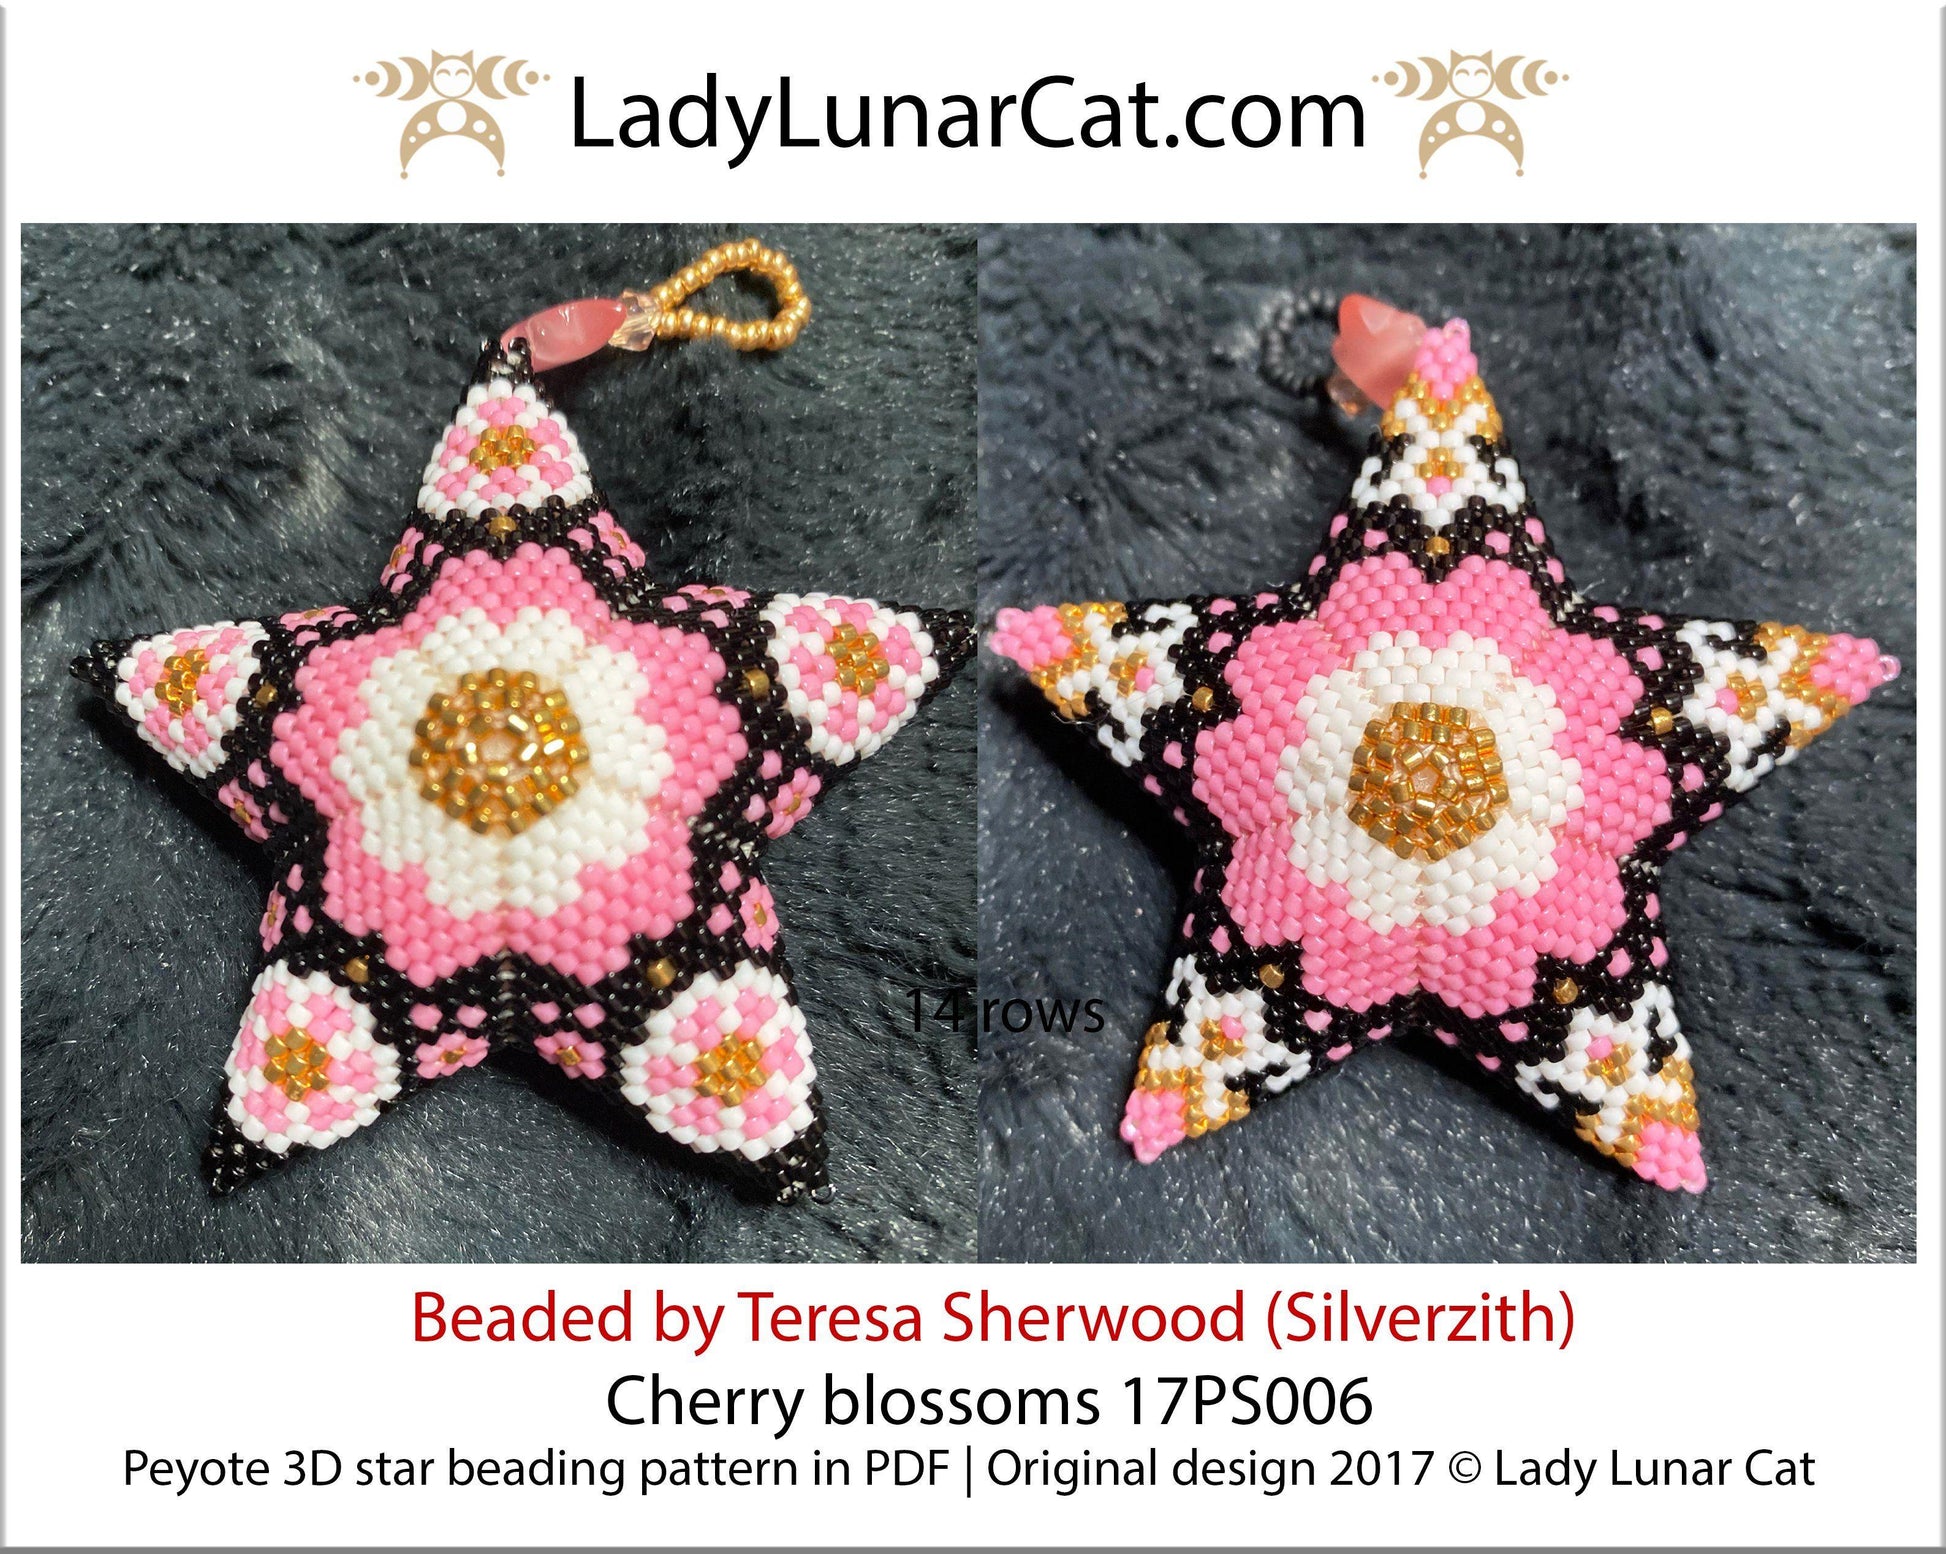 3d peyote star patterns for beading Cherry blossoms 17PS006 LadyLunarCat